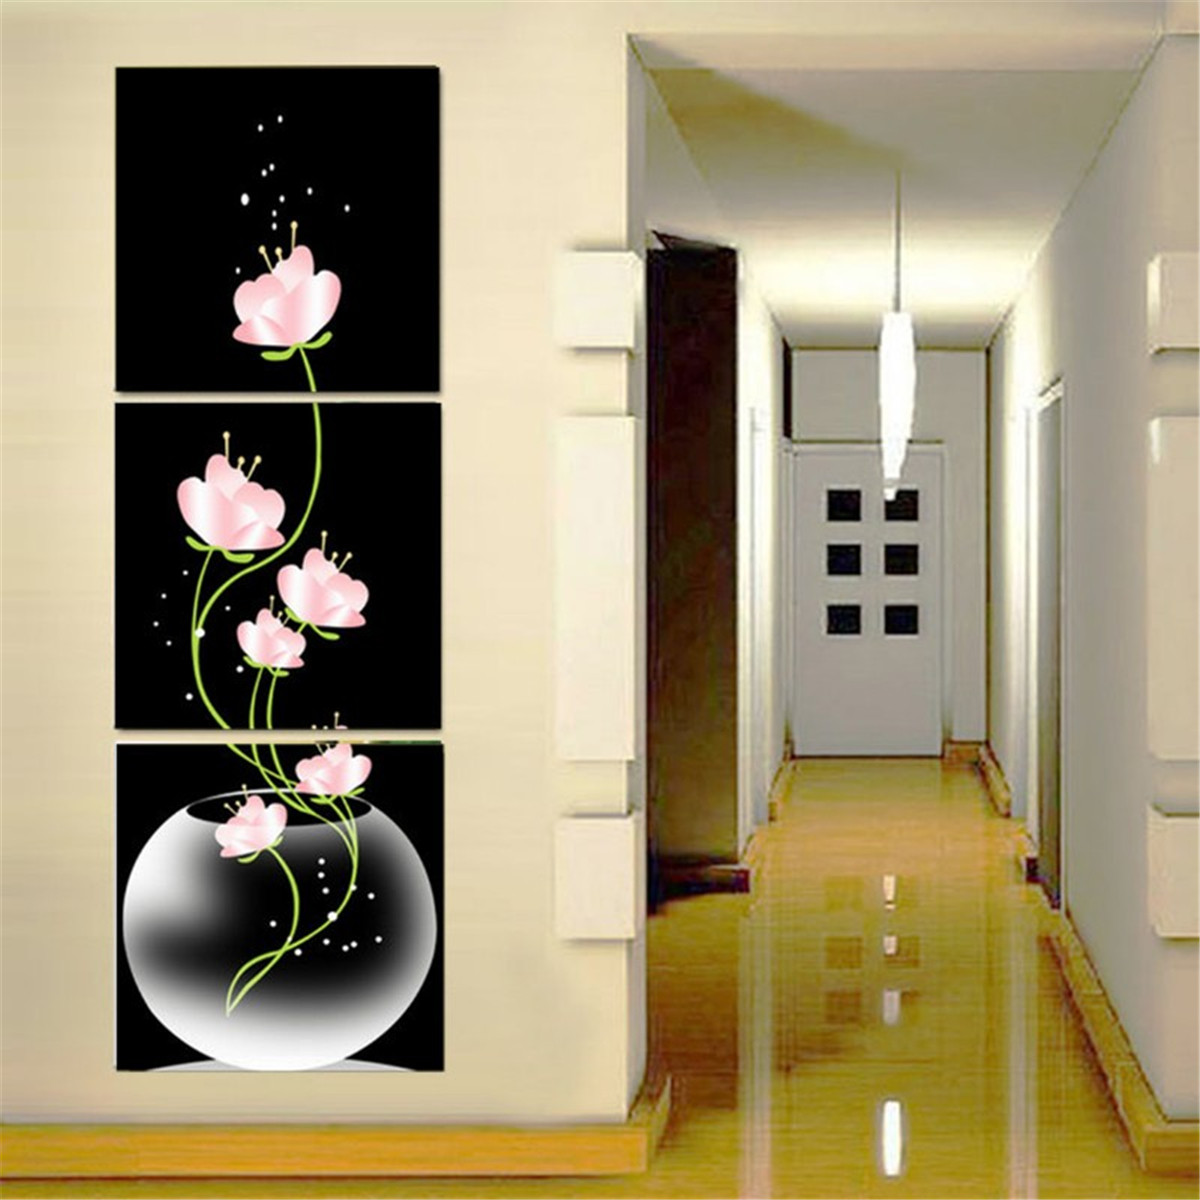 

40x40cm Combination Canvas Print Painting 3Pcs Flowers Lotus Printed On Canvas Home Entryway Wall Decor